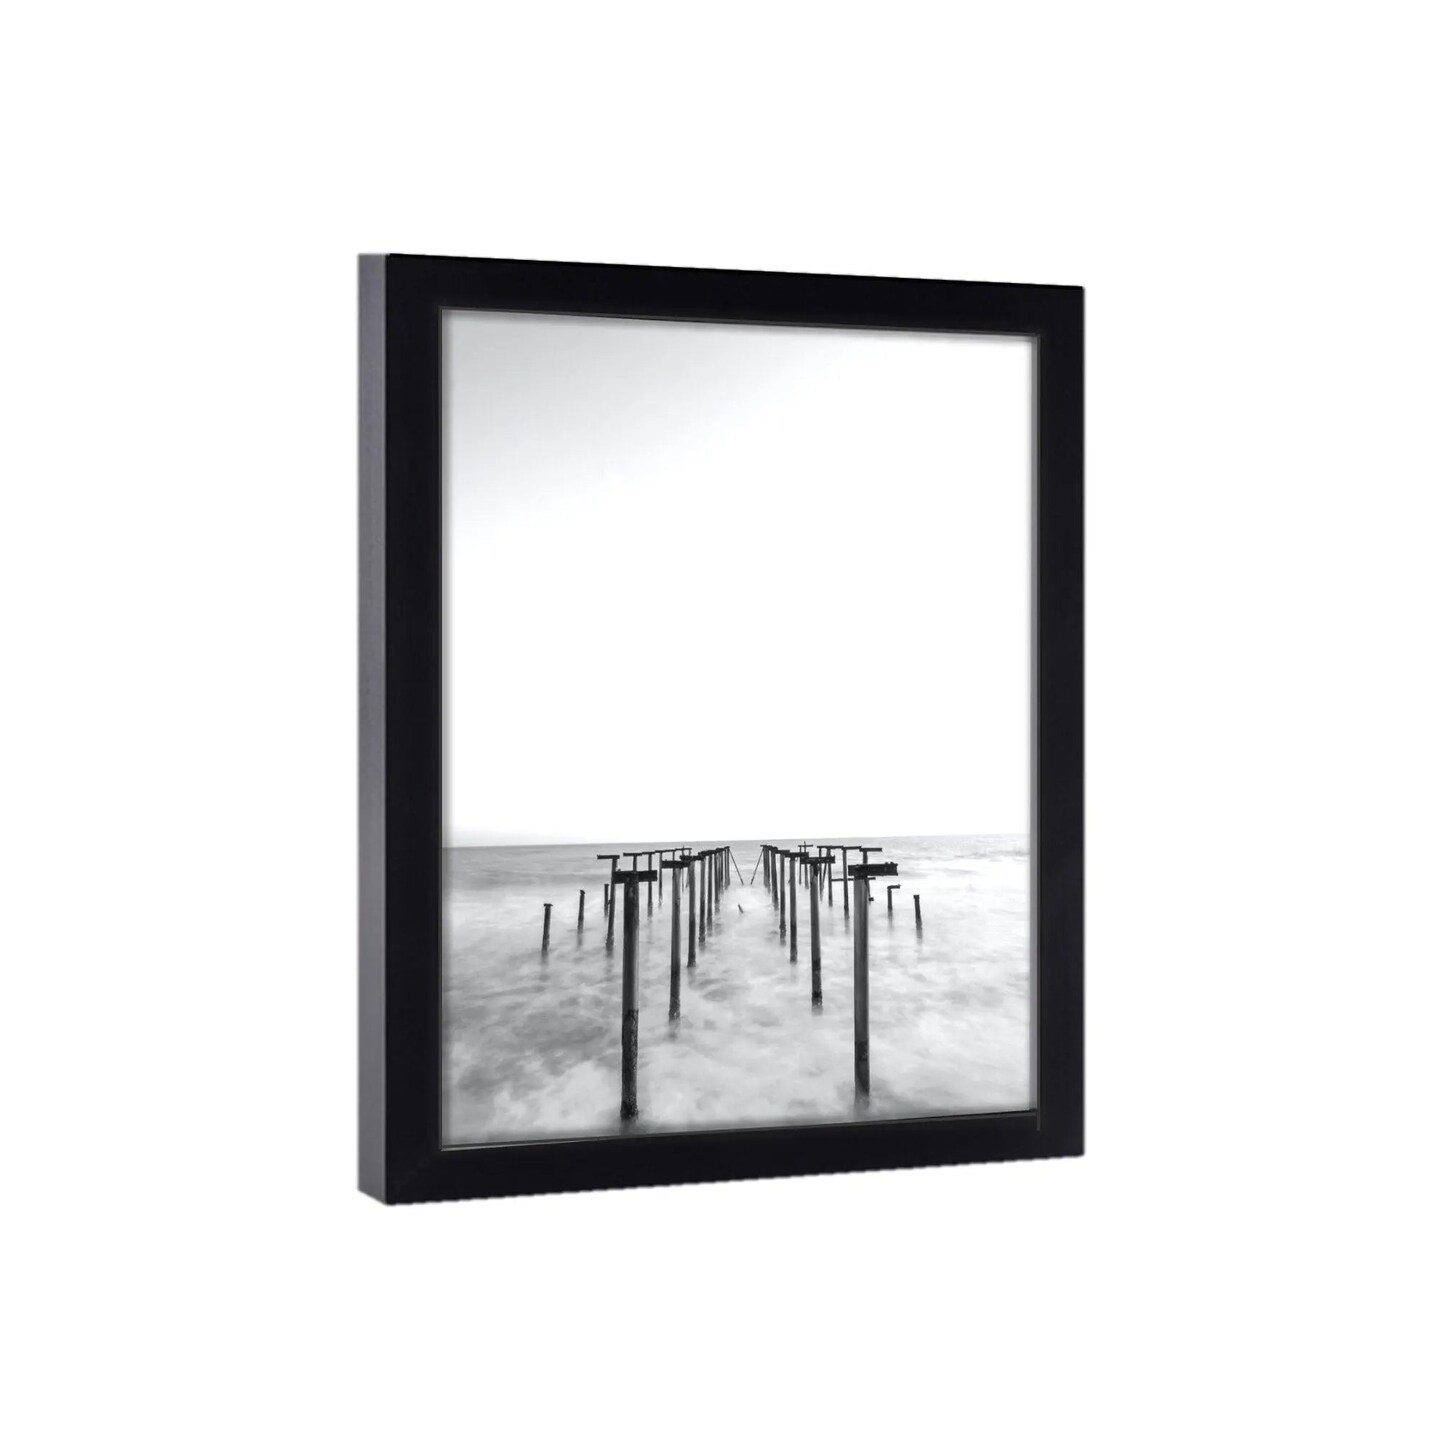 Gallery 36x48 Picture Frame Black 36x48 Frame 36 x 48 Poster Frames 36 x 48